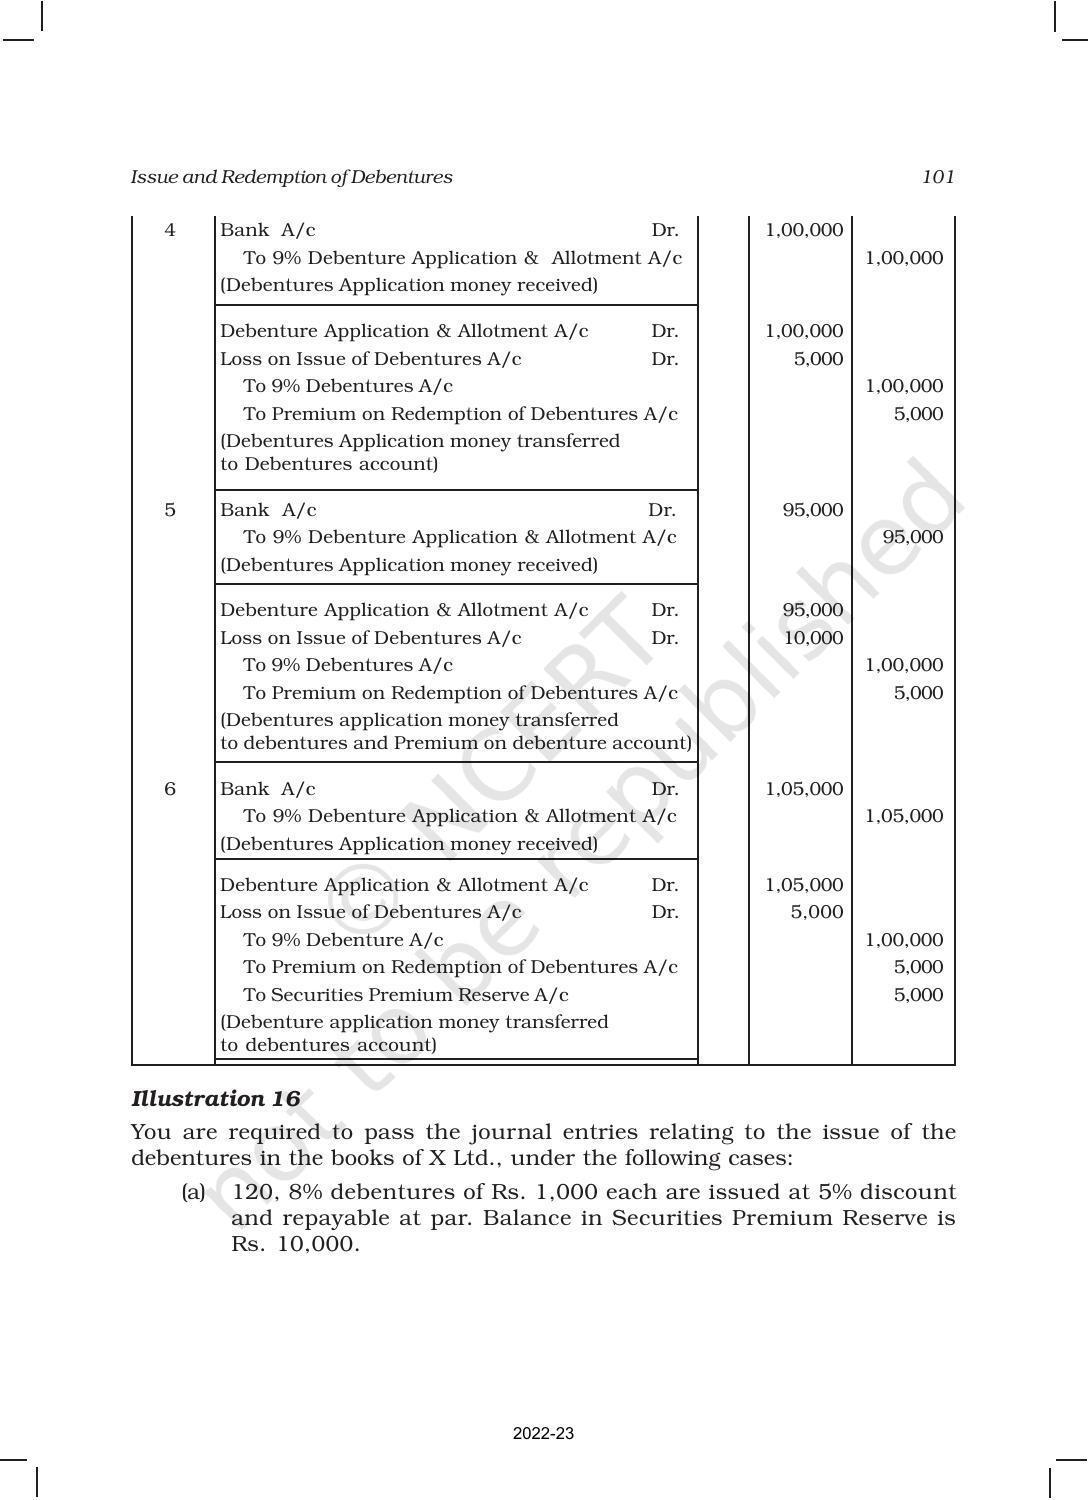 NCERT Book for Class 12 Accountancy Part II Chapter 1 Issue and Redemption of Debentures - Page 27